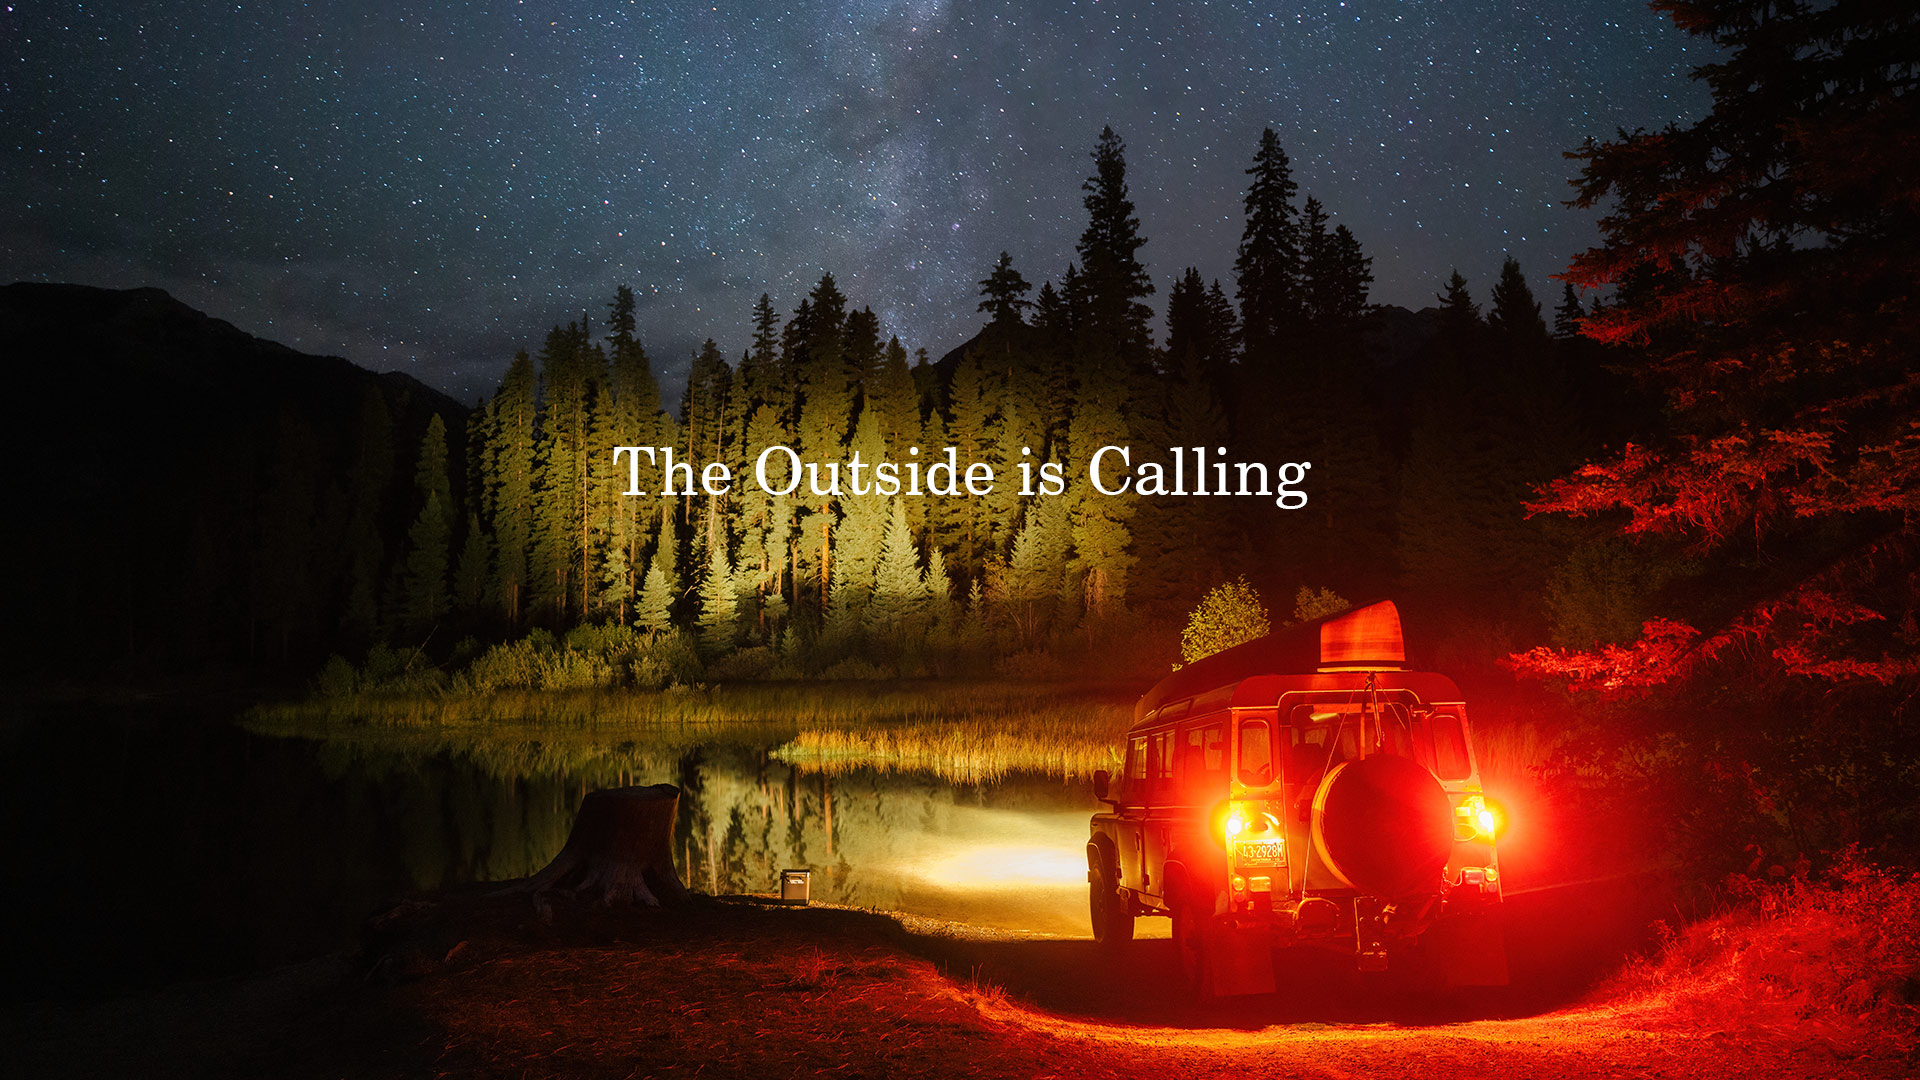 The Outside is Calling - Coleman